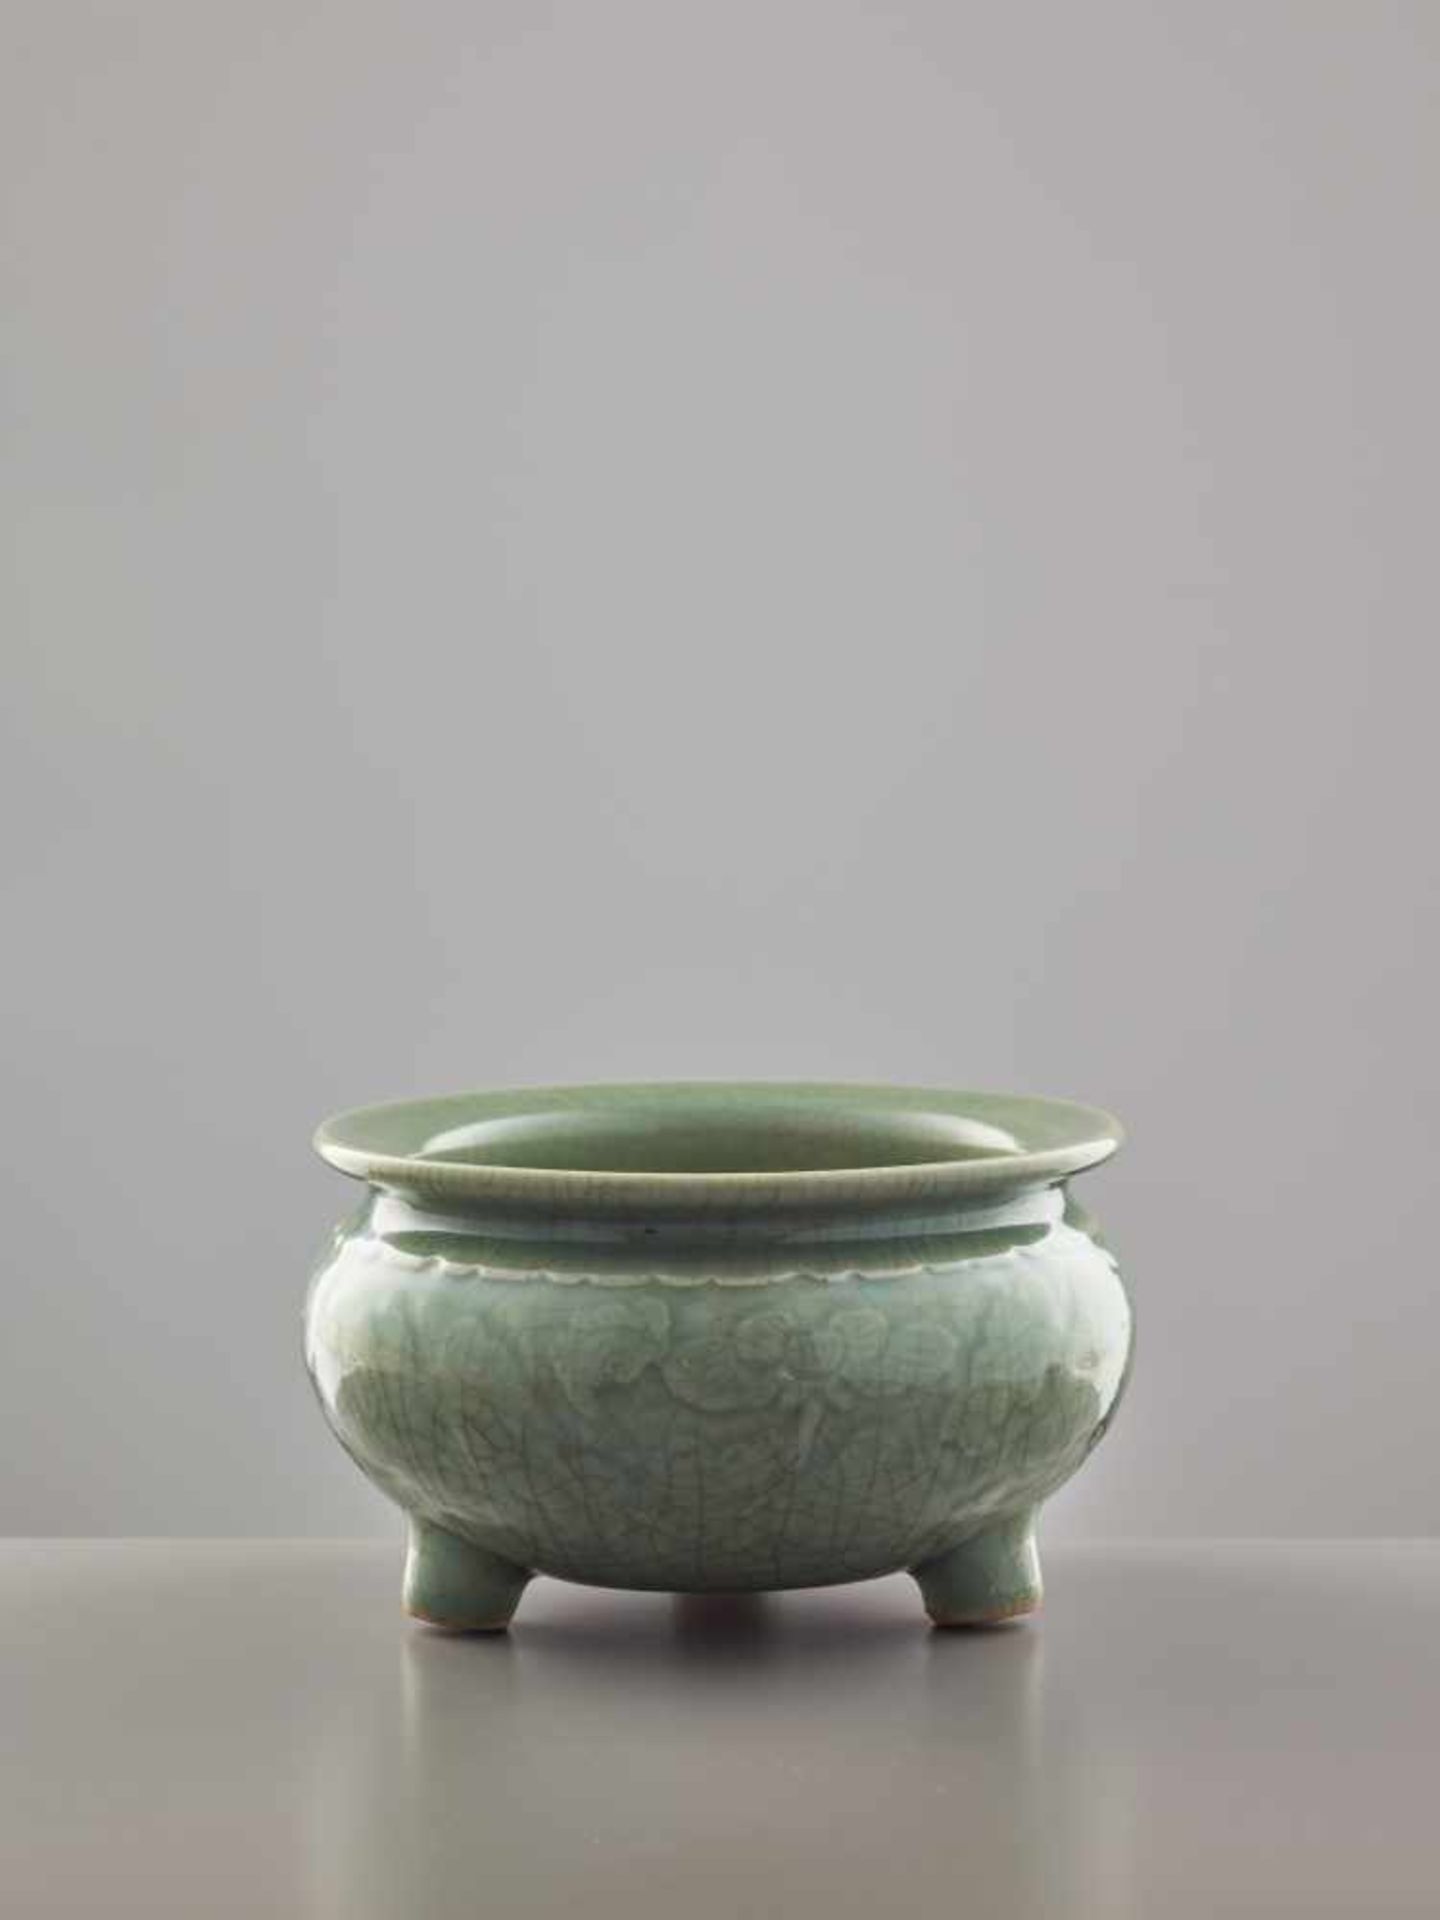 A LONGQUAN CELADON TRIPOD ‘PEONY’ CENSER, MING DYNASTY Celadon glaze stoneware with carved - Image 3 of 7